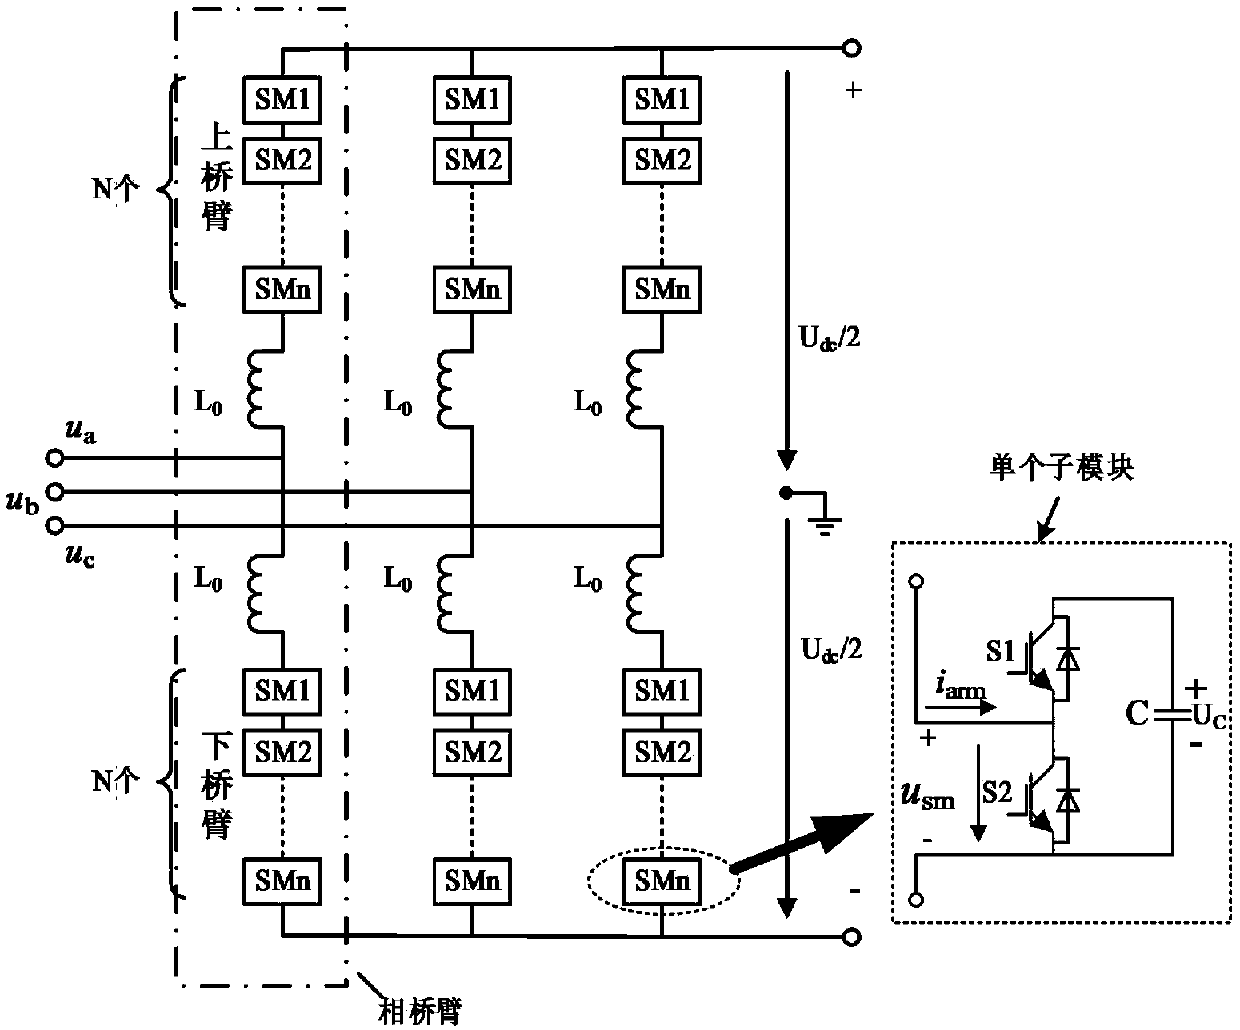 Voltage modulation method for access of weak current AC power grid